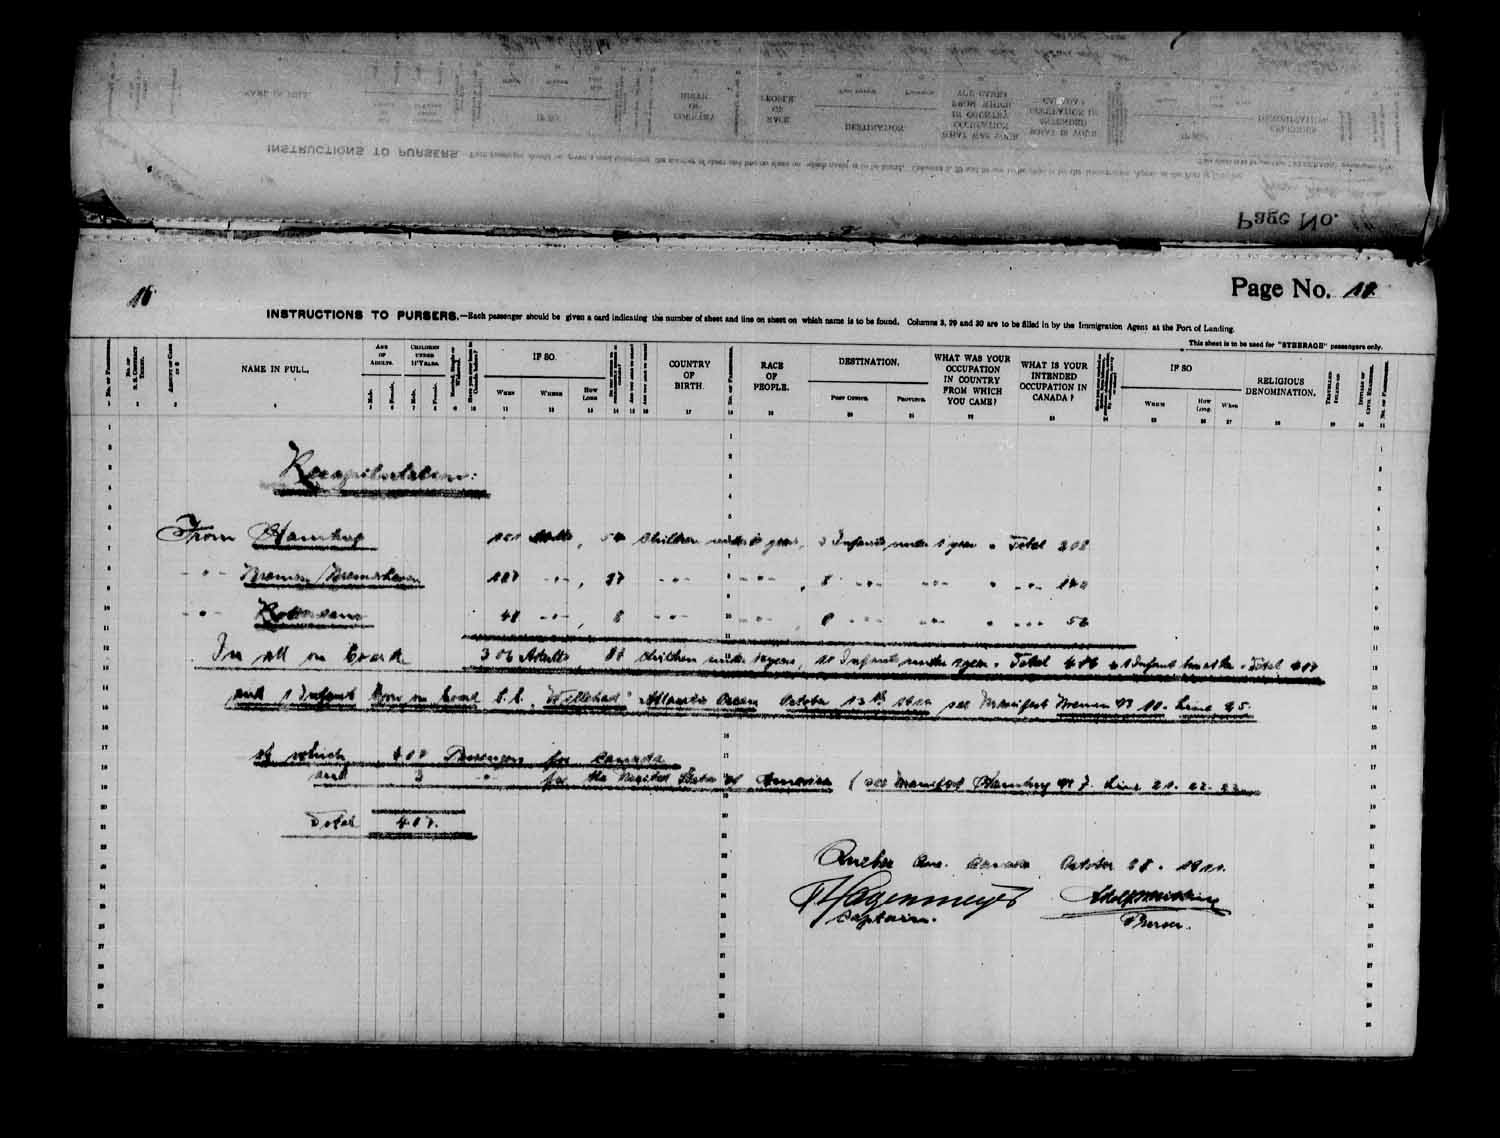 Digitized page of Passenger Lists for Image No.: e003575106